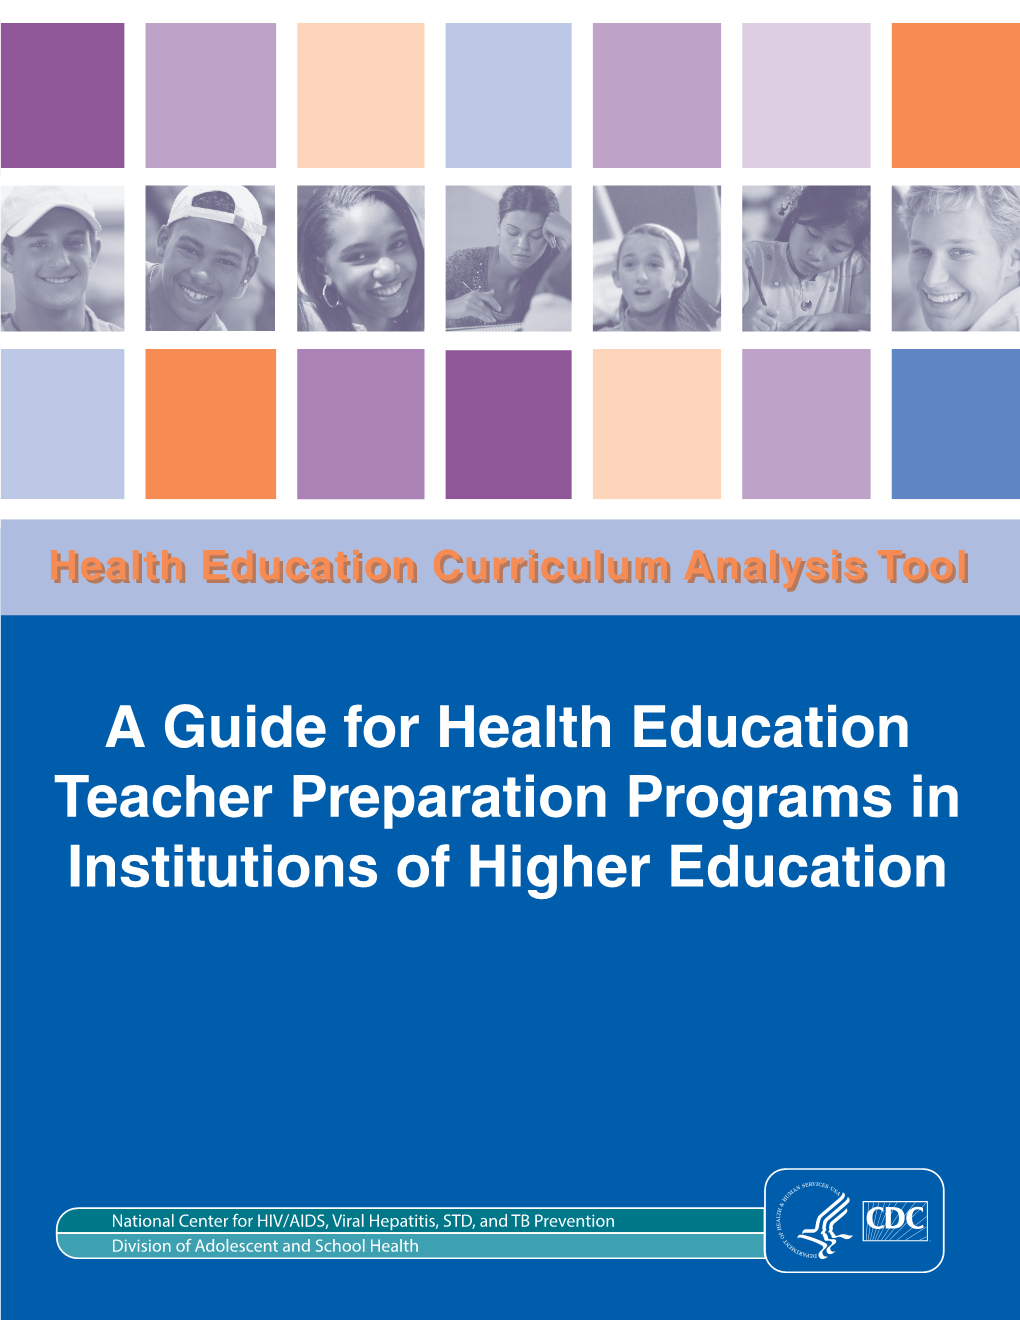 A Guide for Health Education Teacher Preparation Programs in Institutions of Higher Education